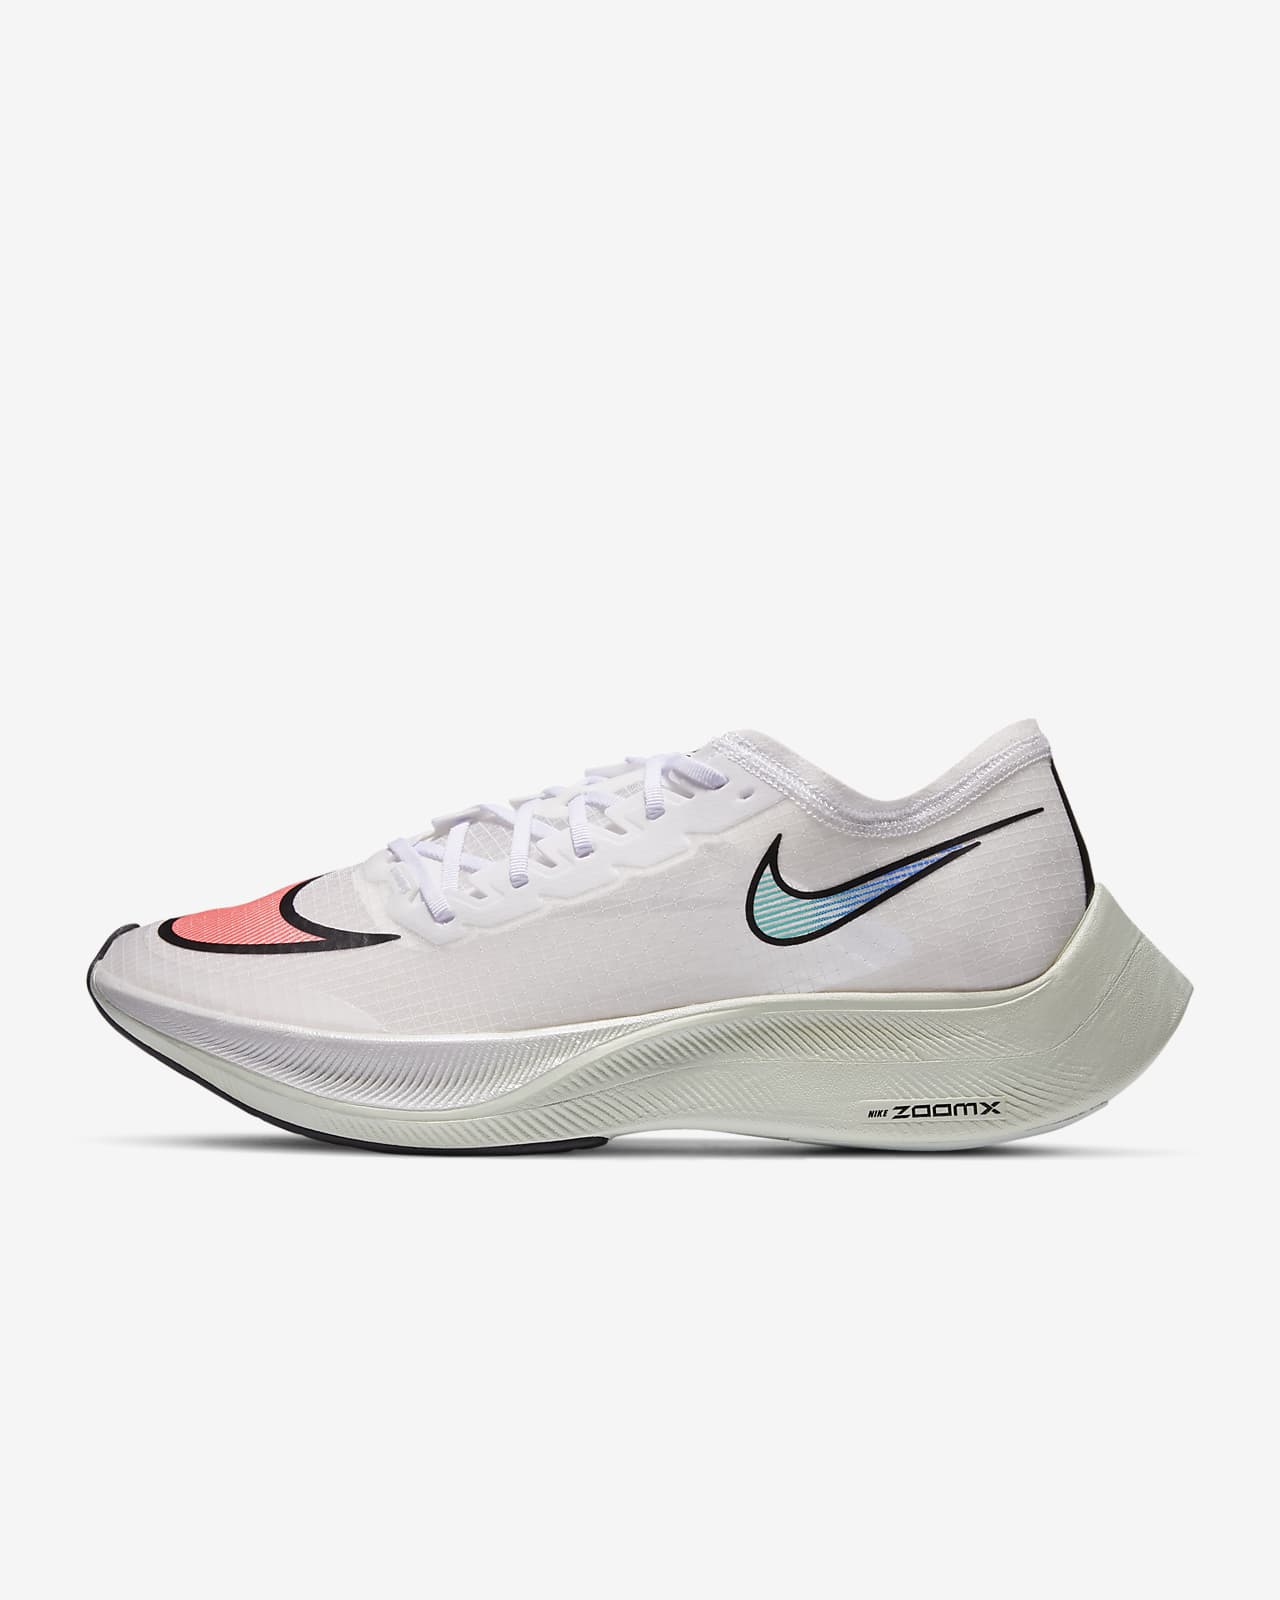 nike zoomx vaporfly next sold out